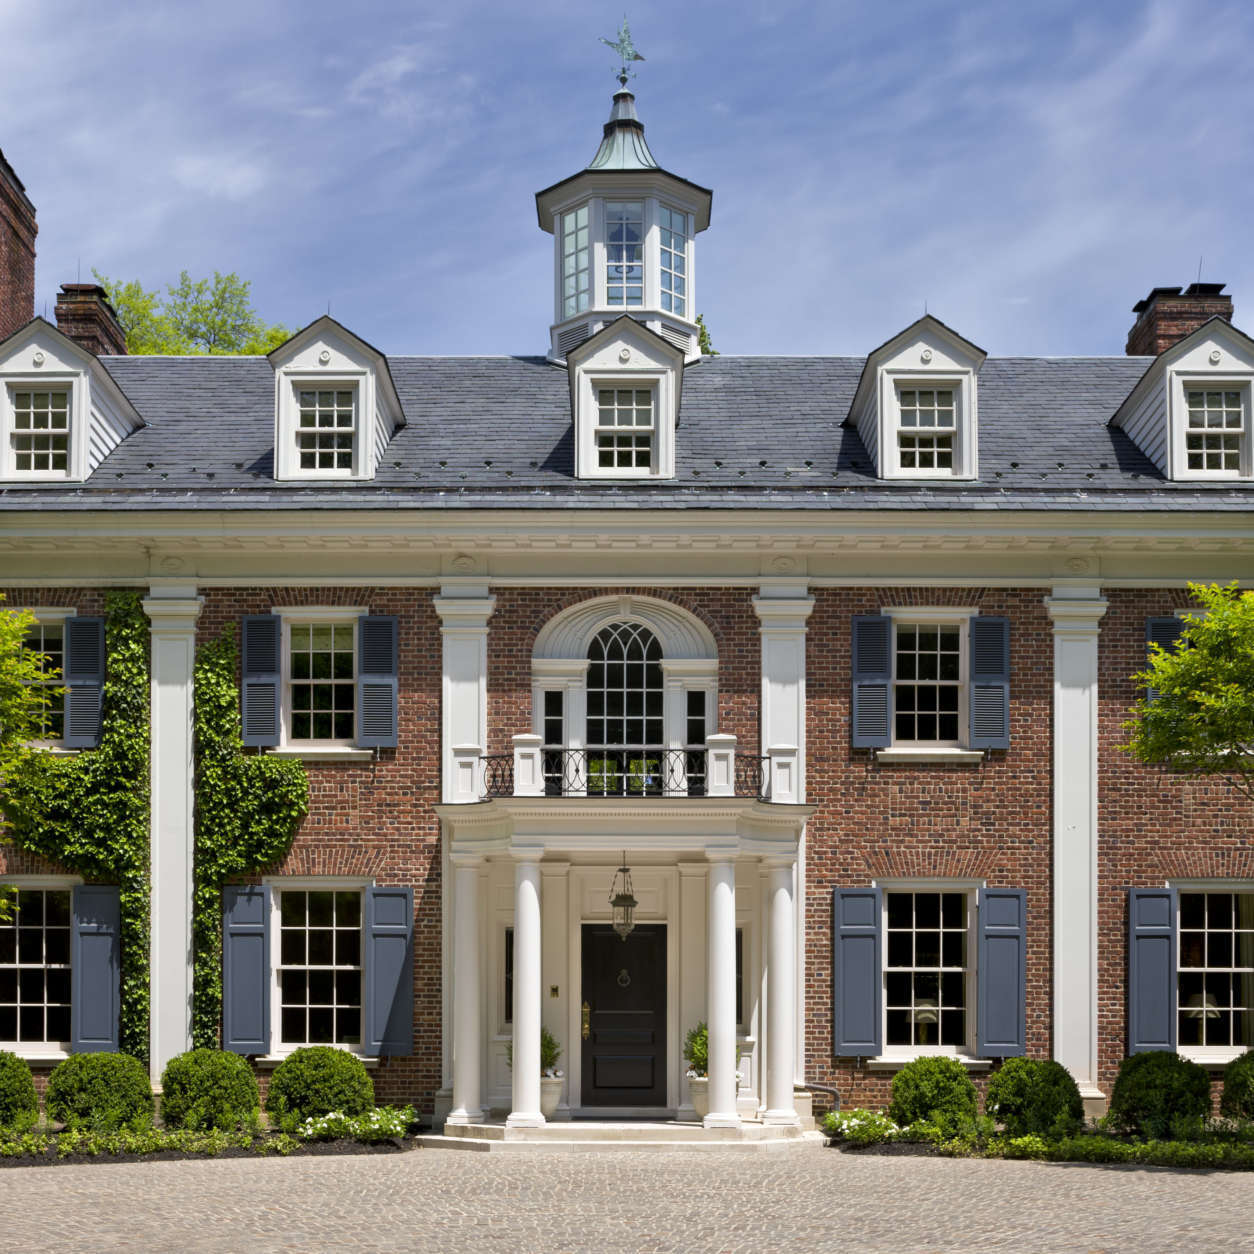 The circa-1919 Georgian estate sits on the banks of the Potomac River in McLean, Virginia. (Courtesy TTR Sotheby's International Realty)